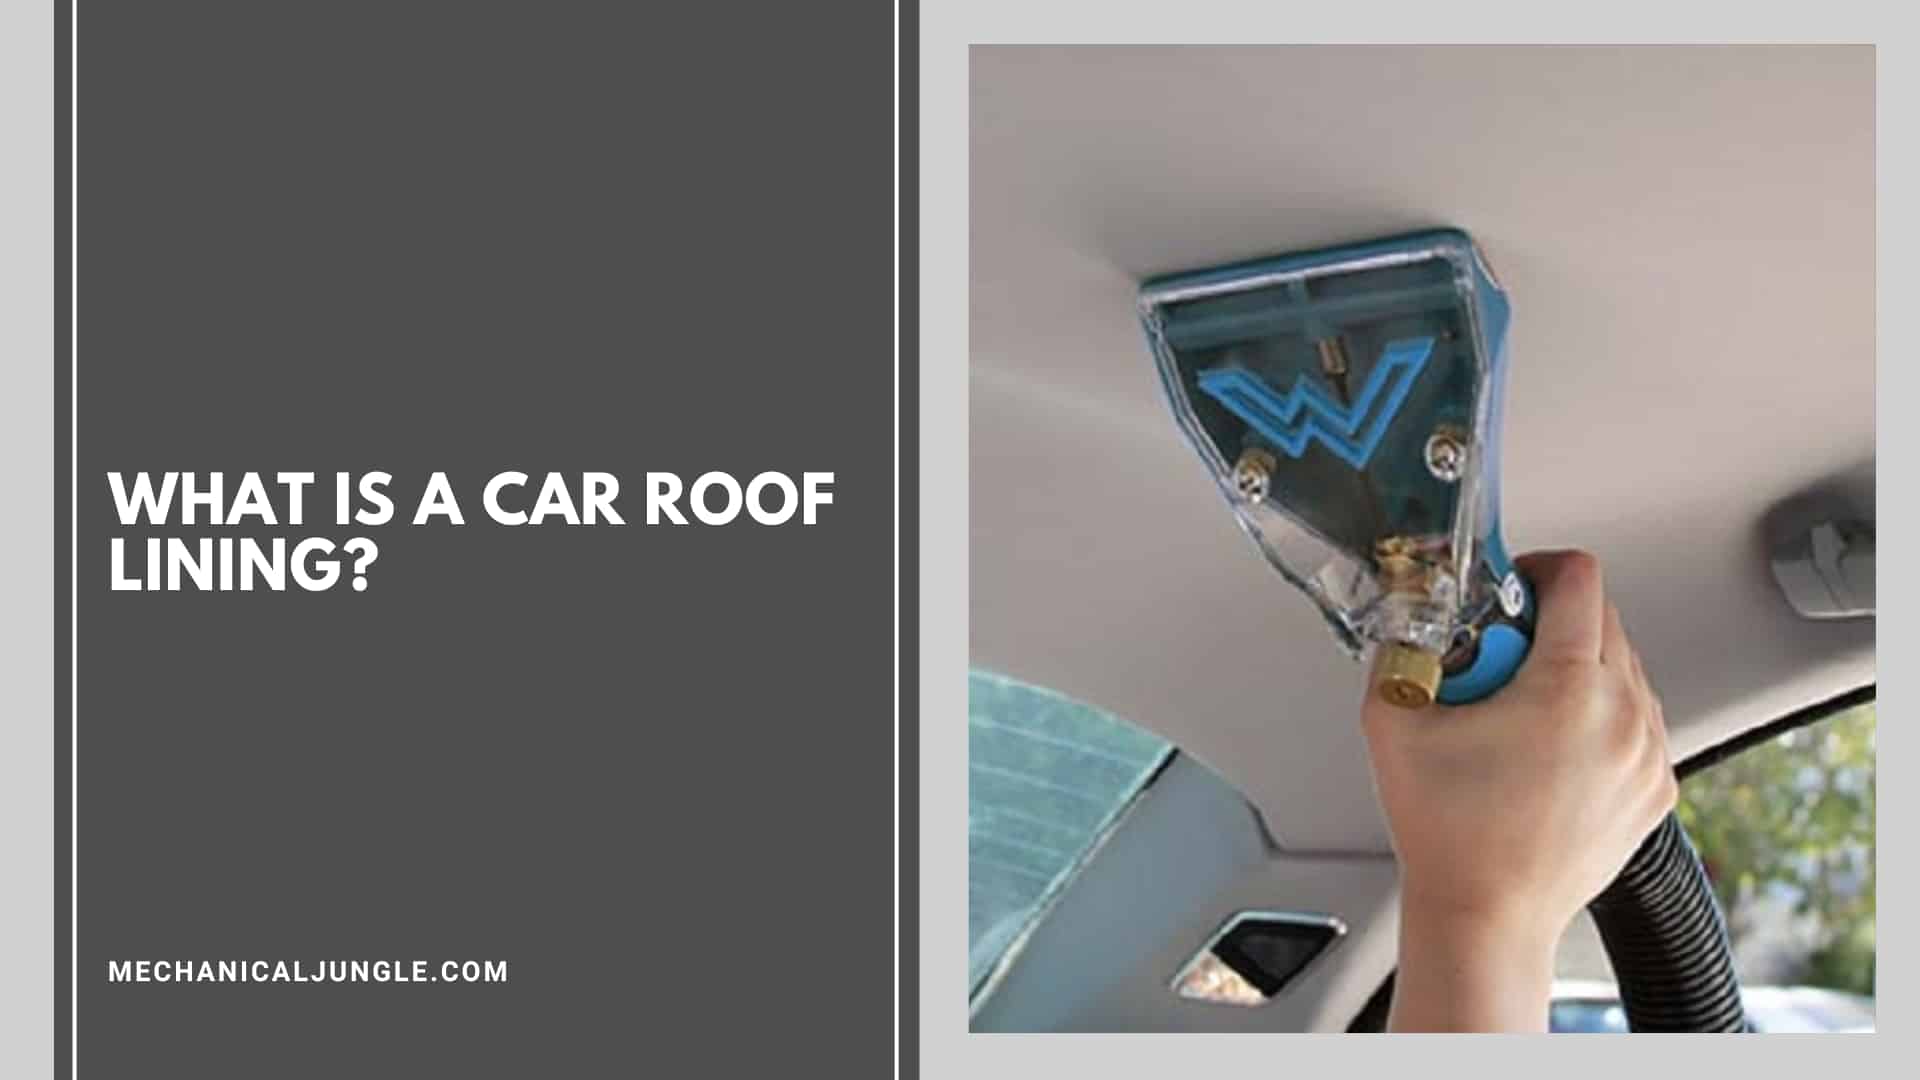 What Is a Car Roof Lining?